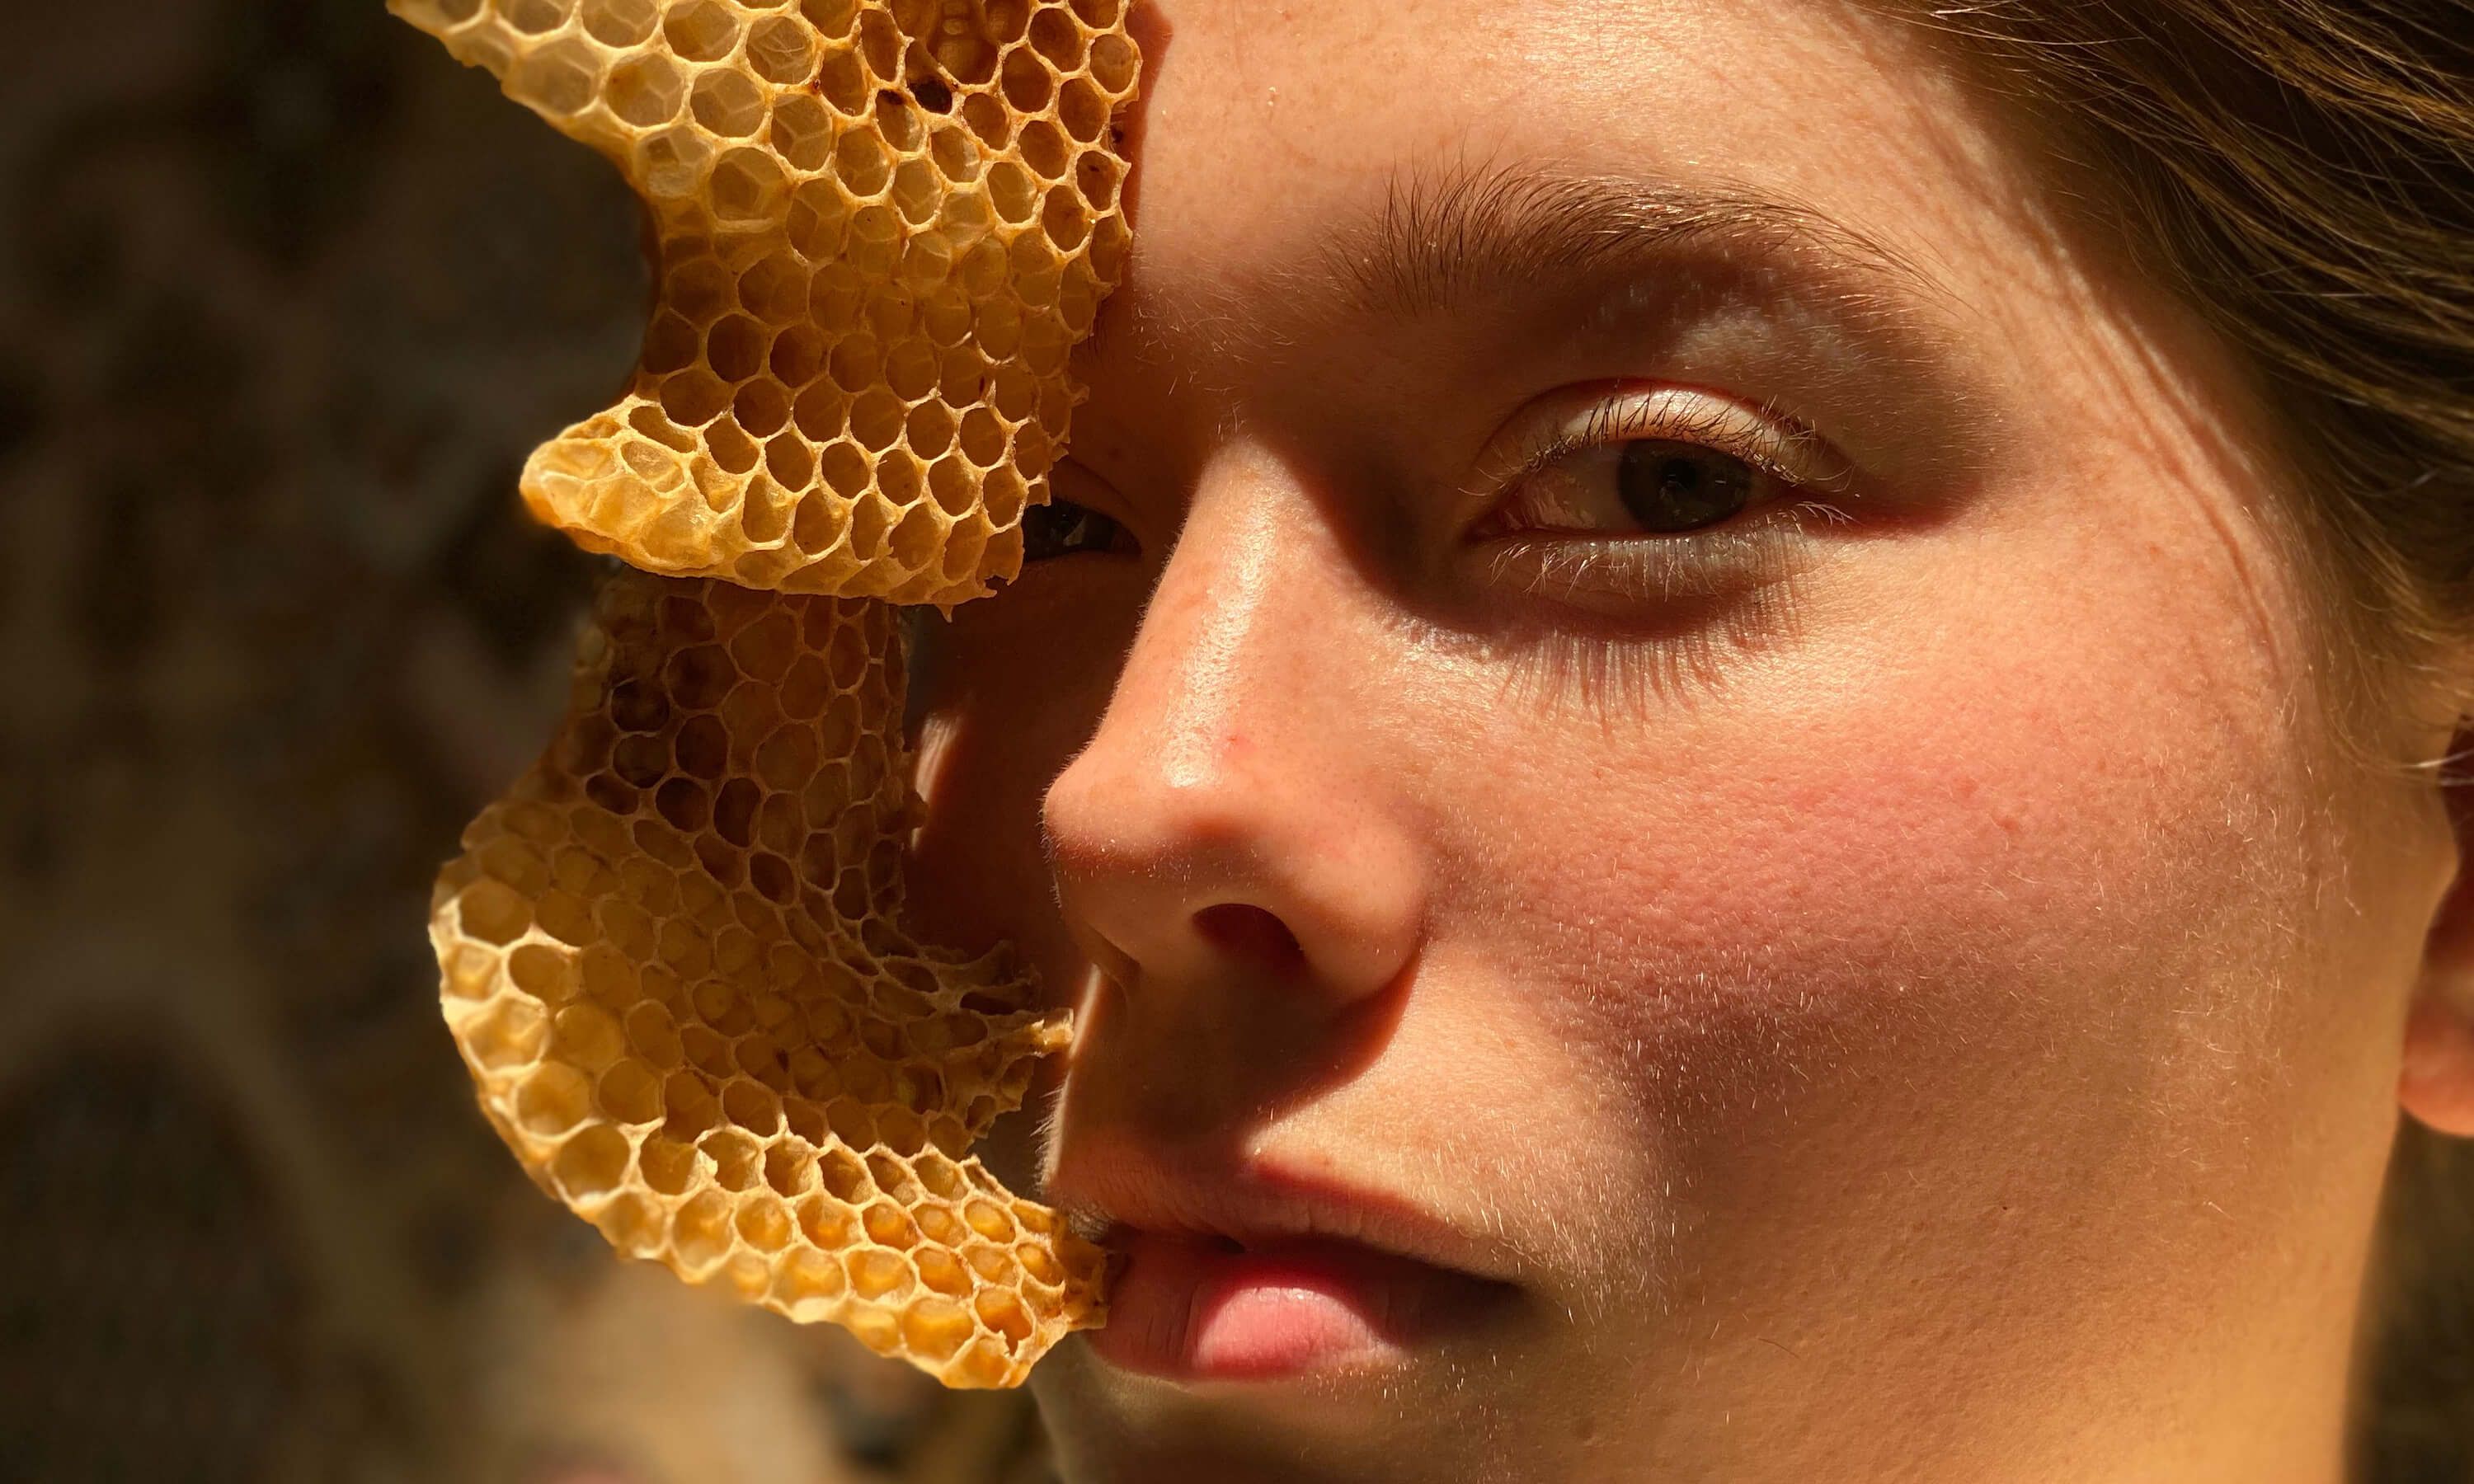 Honey Fingers: The Beekeeper Using Art to Bring People Closer to Nature